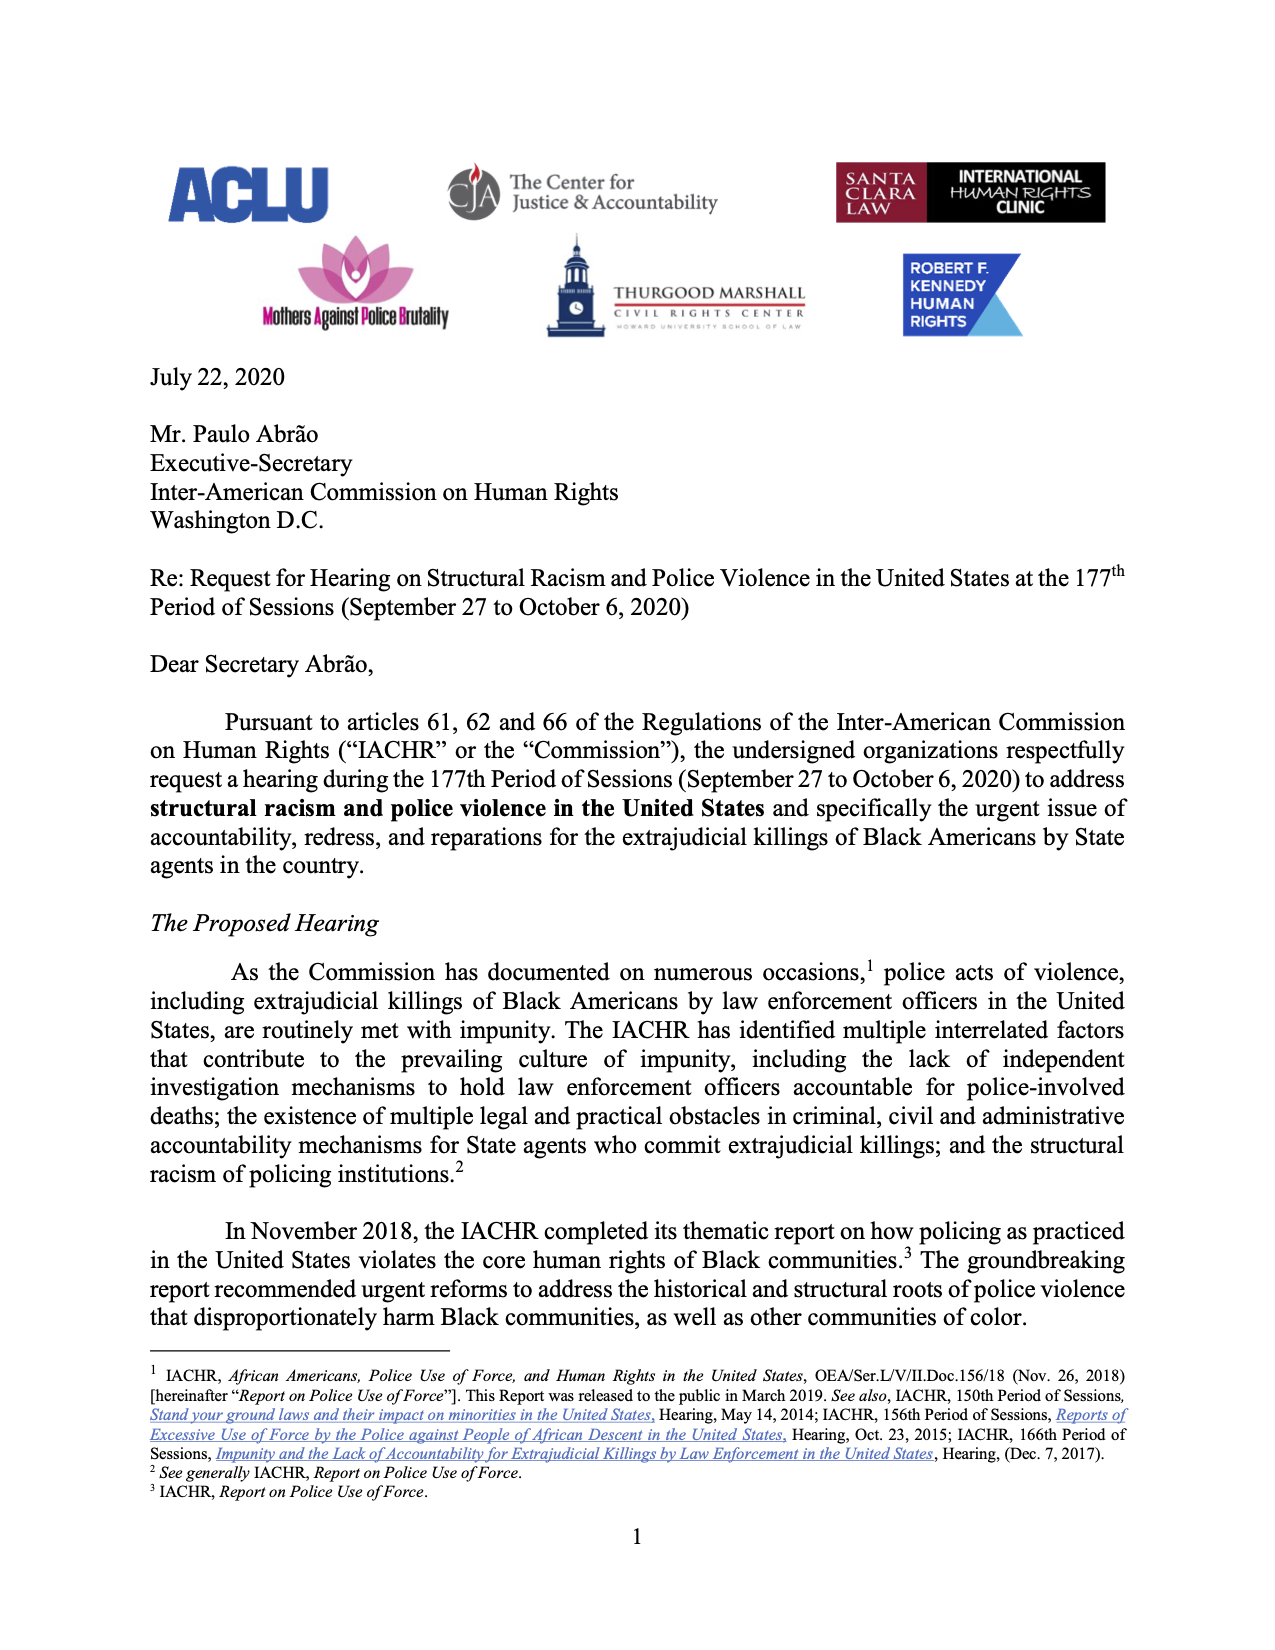 United States: Human Rights Organizations Request Hearing on Structural Racism and Police Violence in the US before the Inter-American Commission on Human Rights